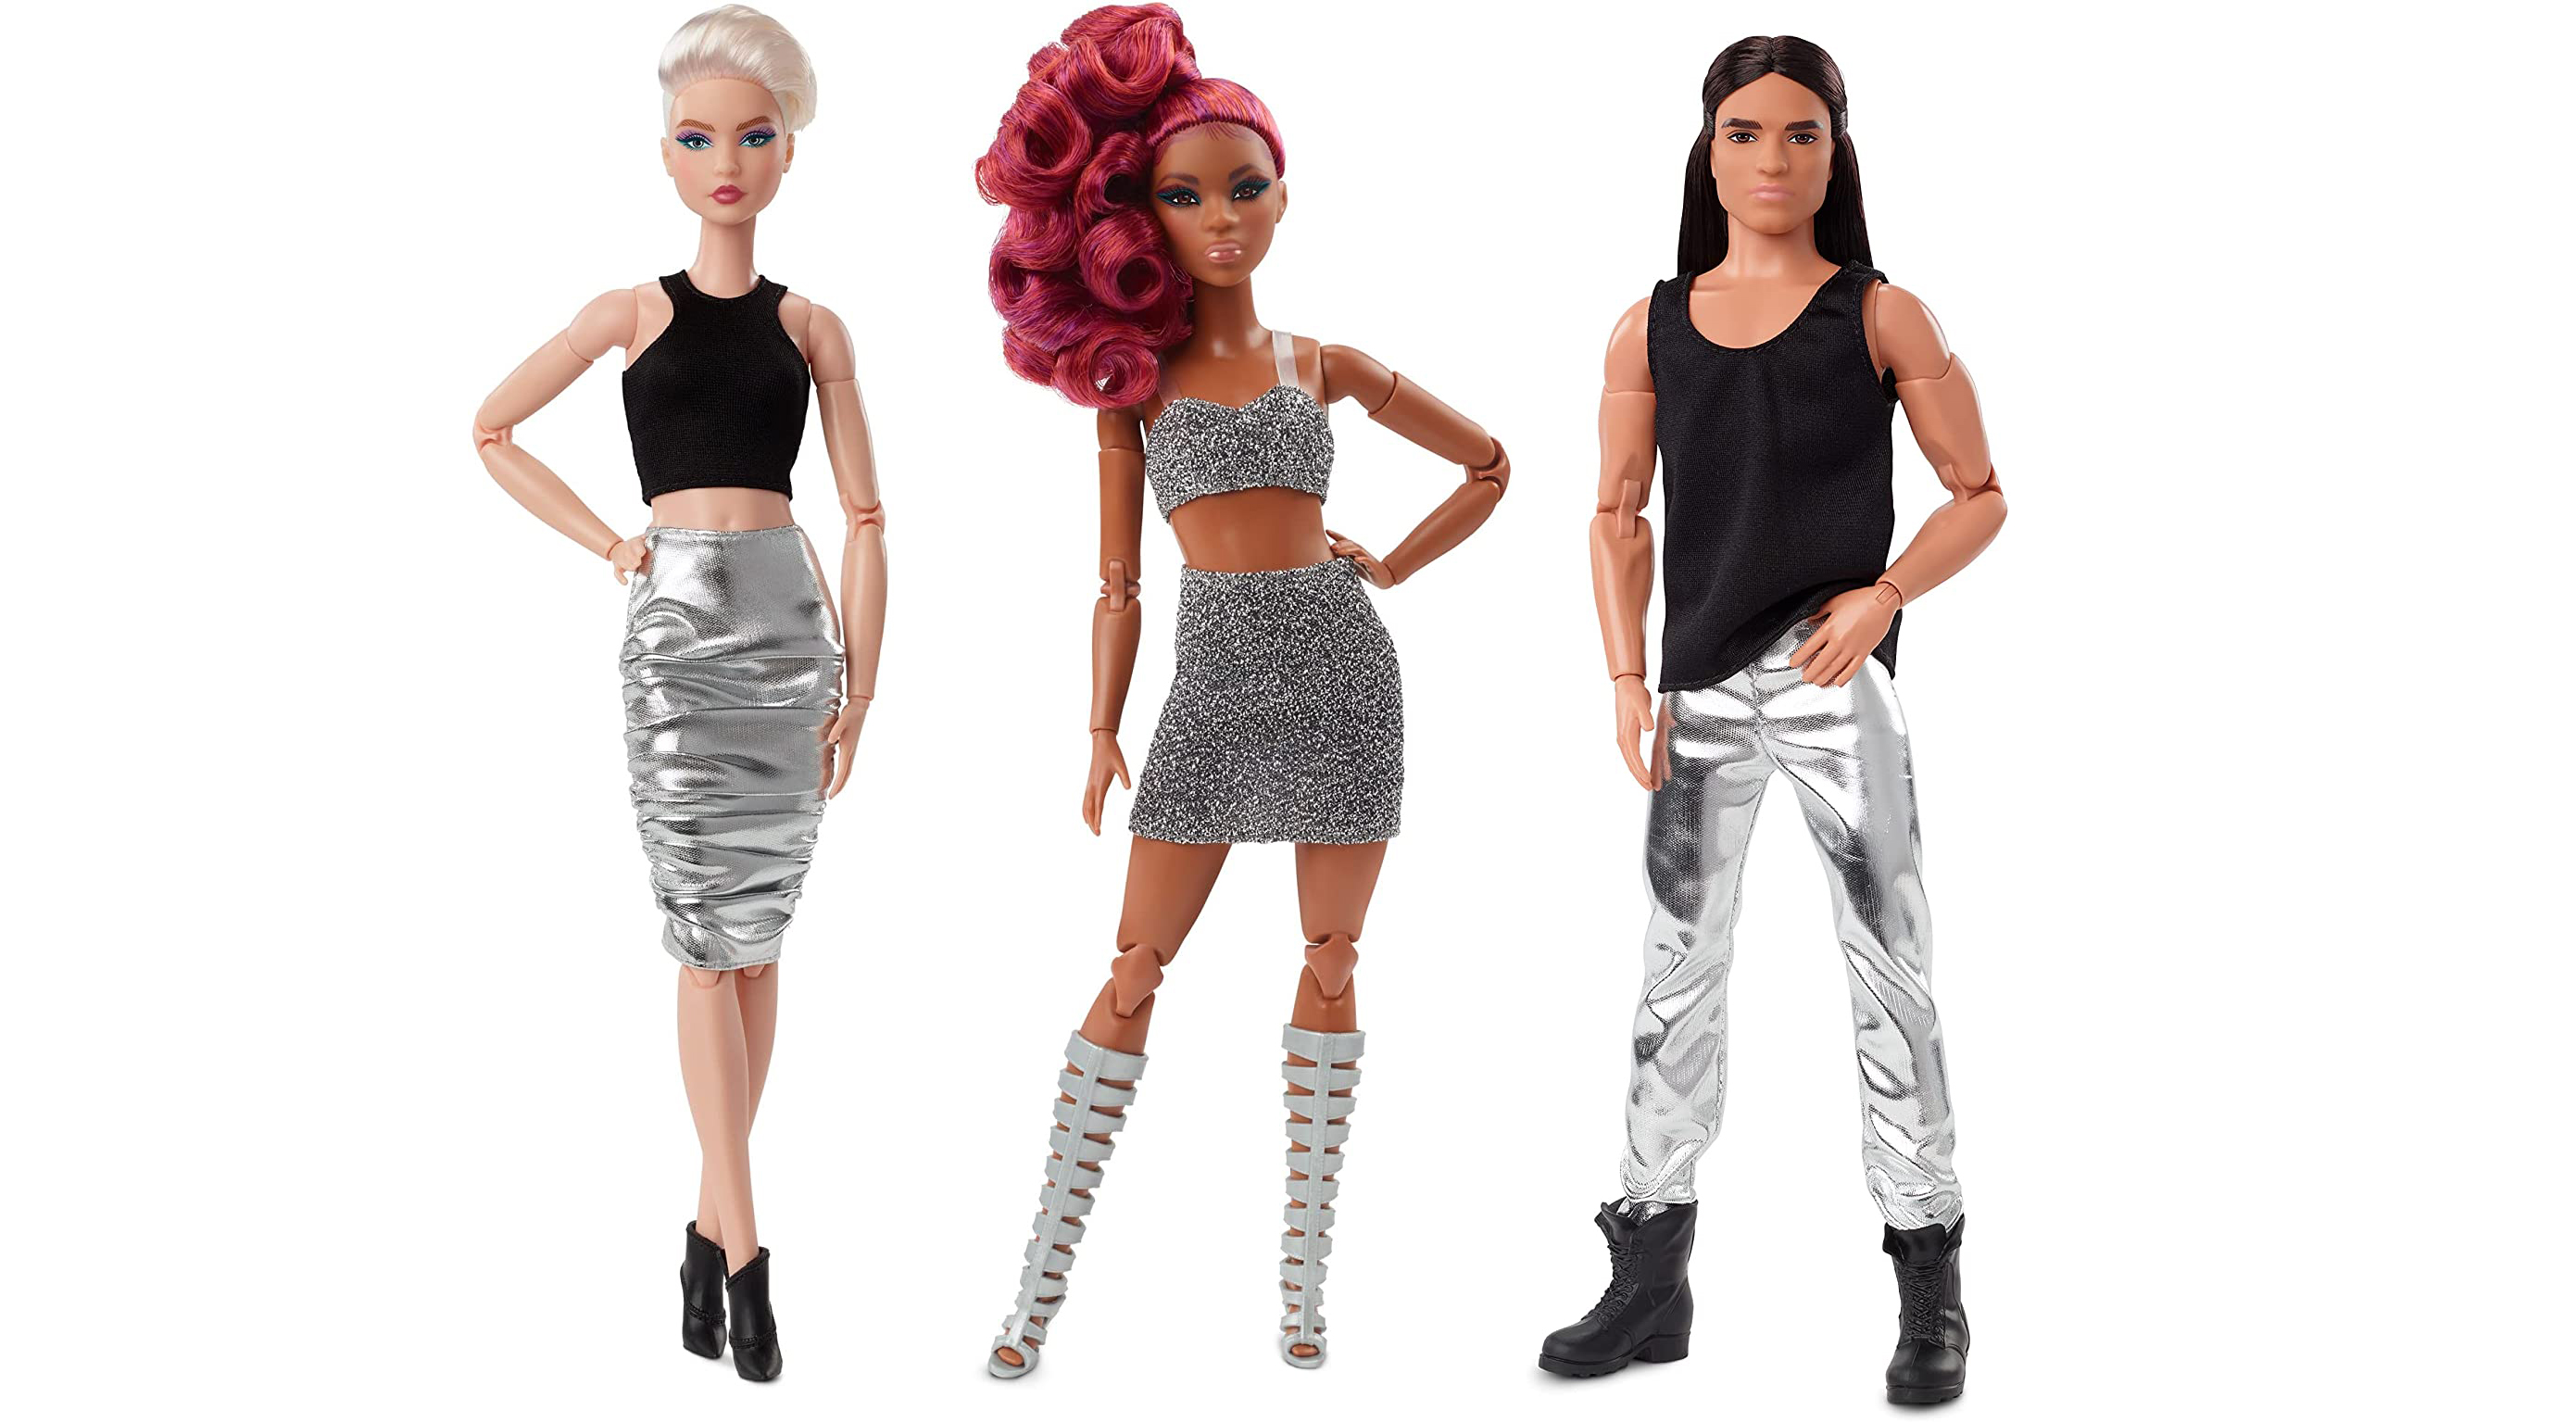 Doll review: Barbie Looks model 2 (curvy)